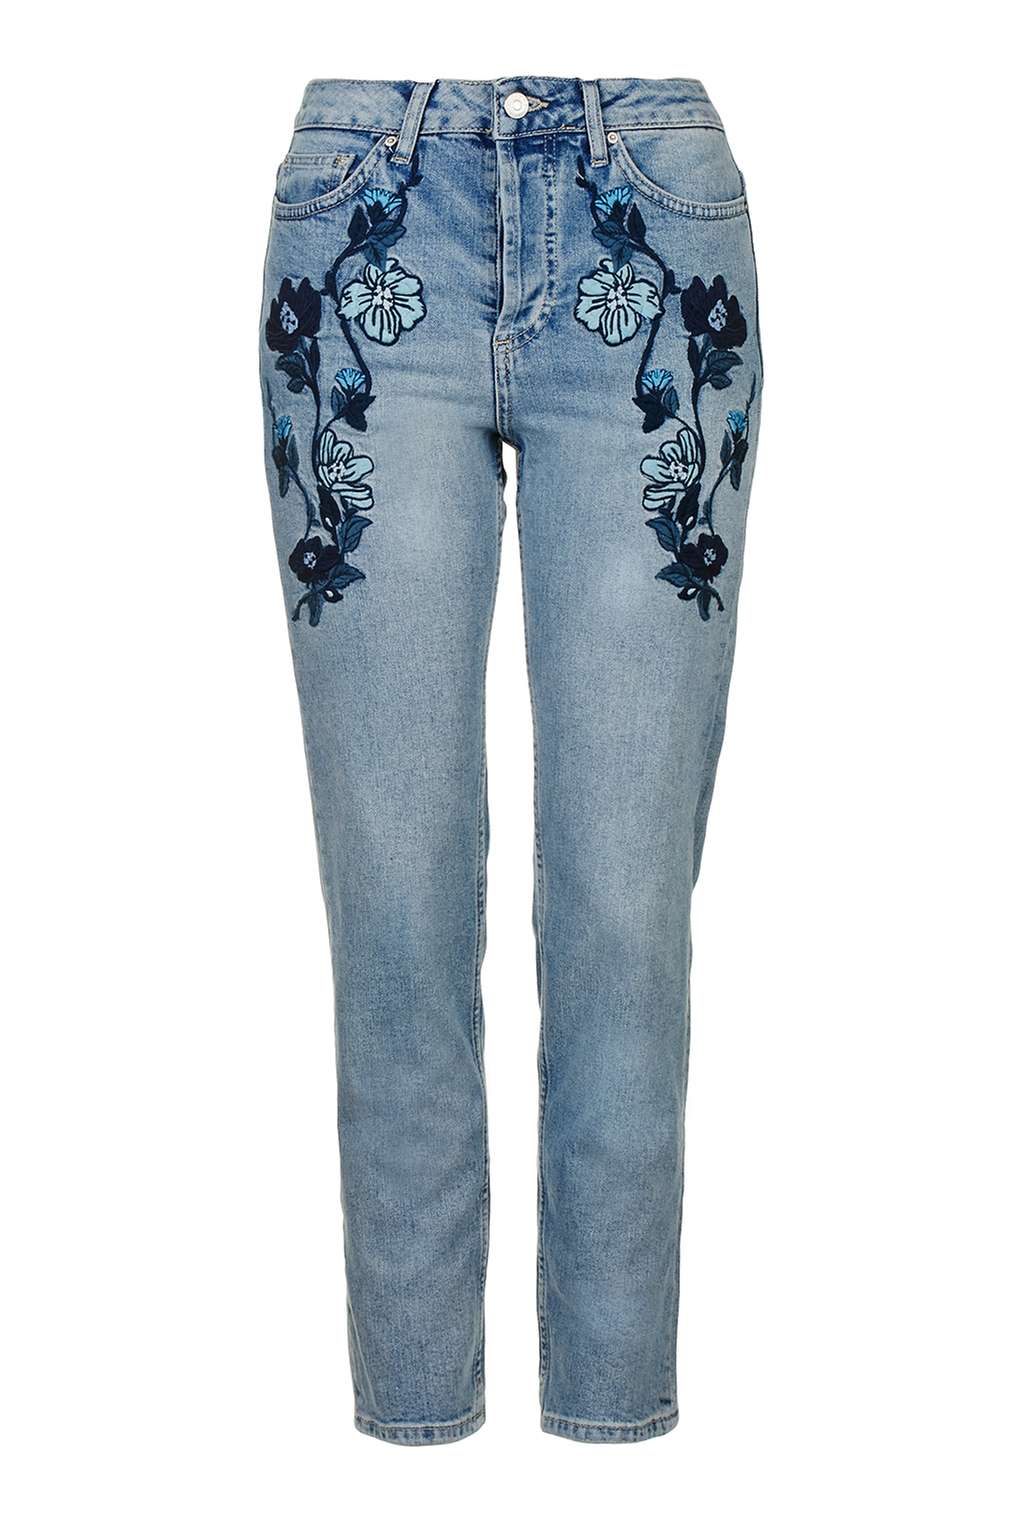 Topshop Blue EMbroidered Jeans.jpg